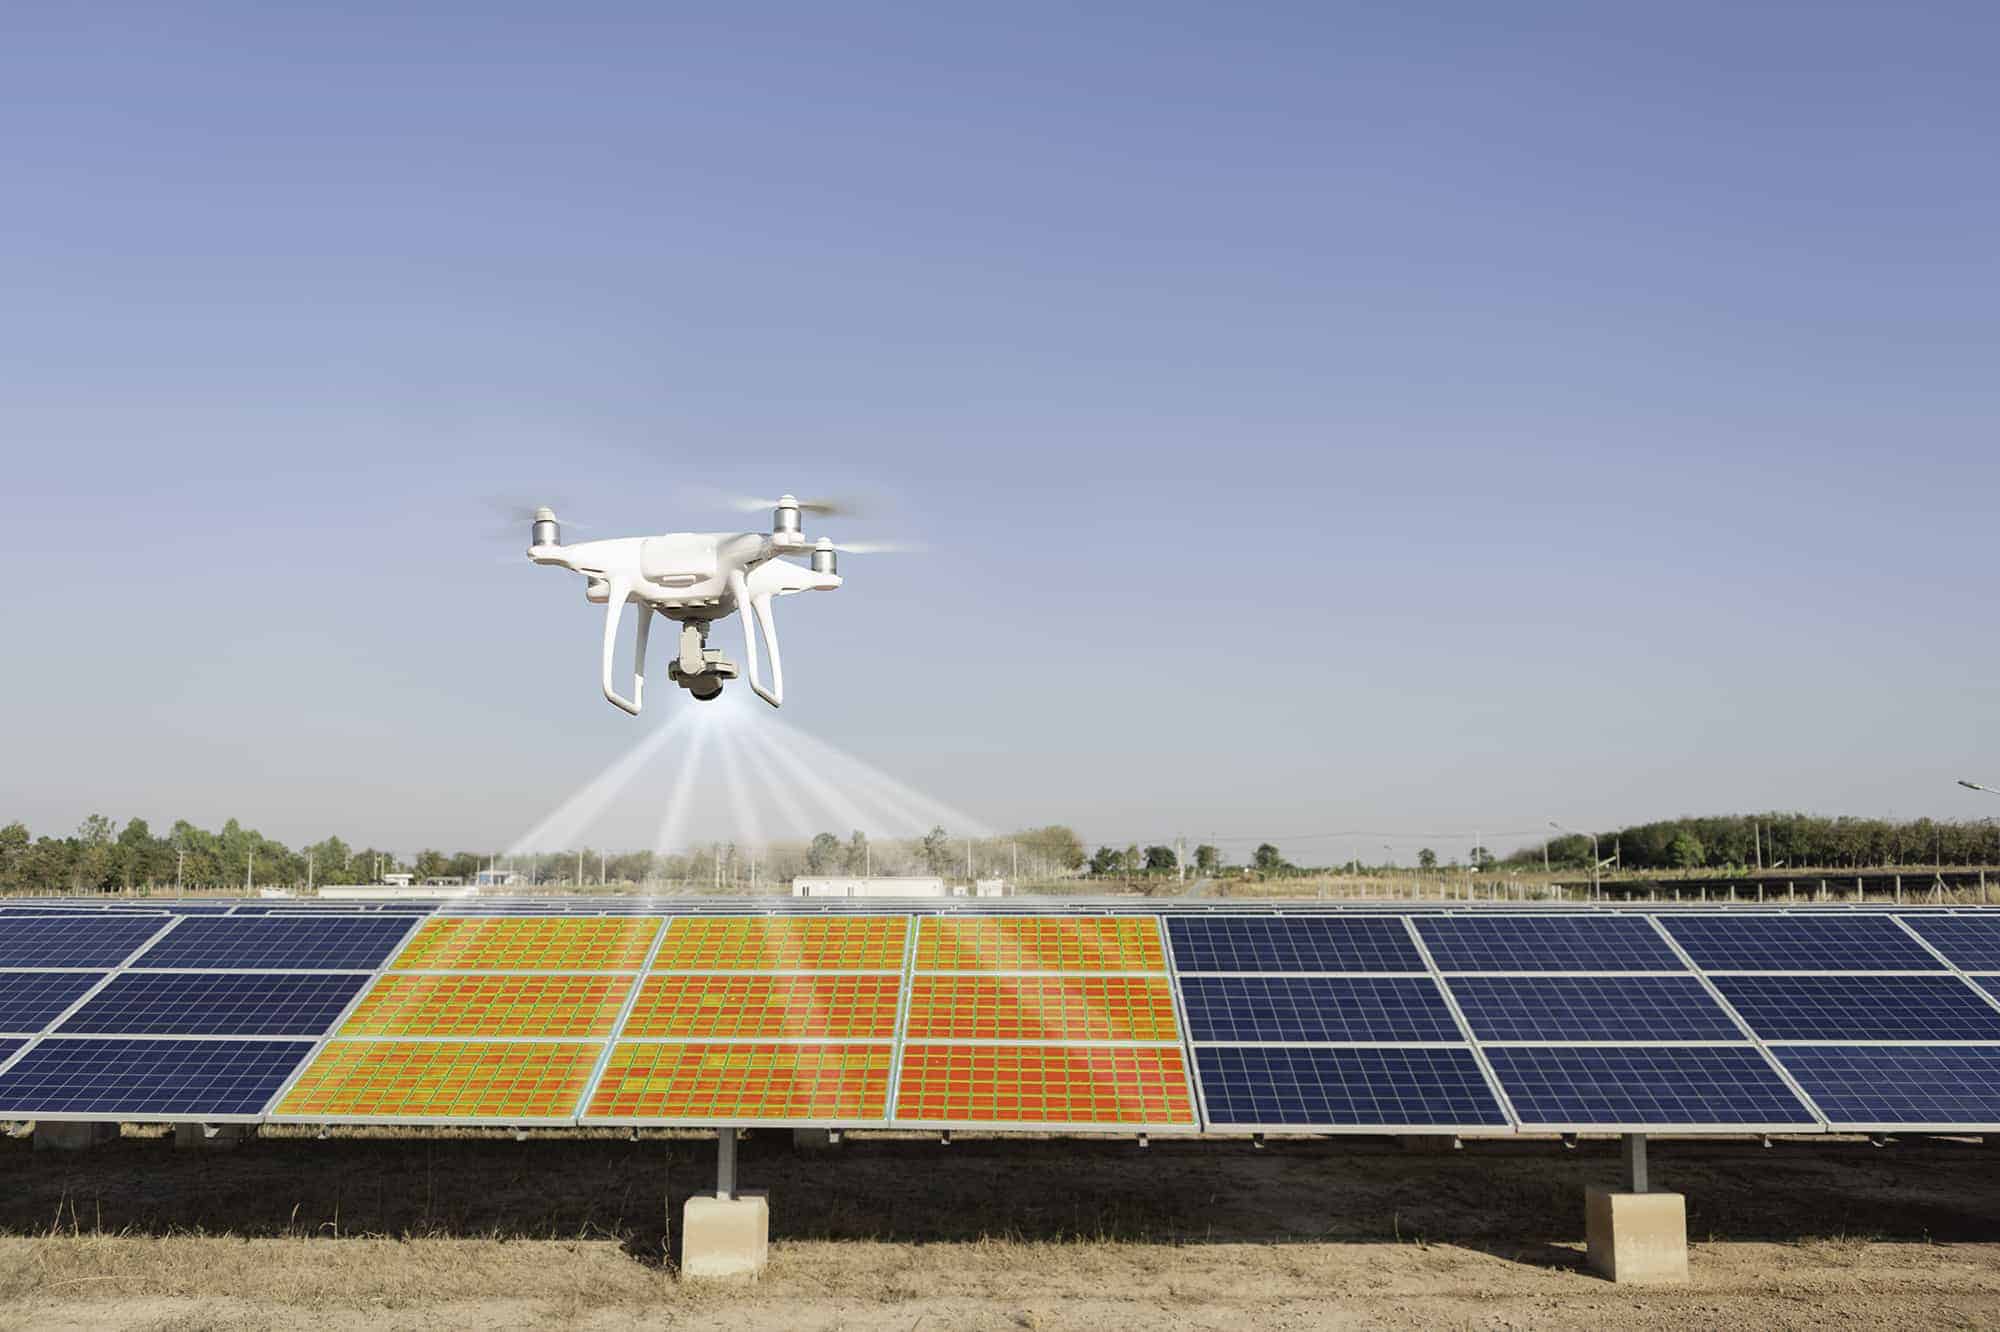 Aerial thermal inspection of solar panel farm with drone